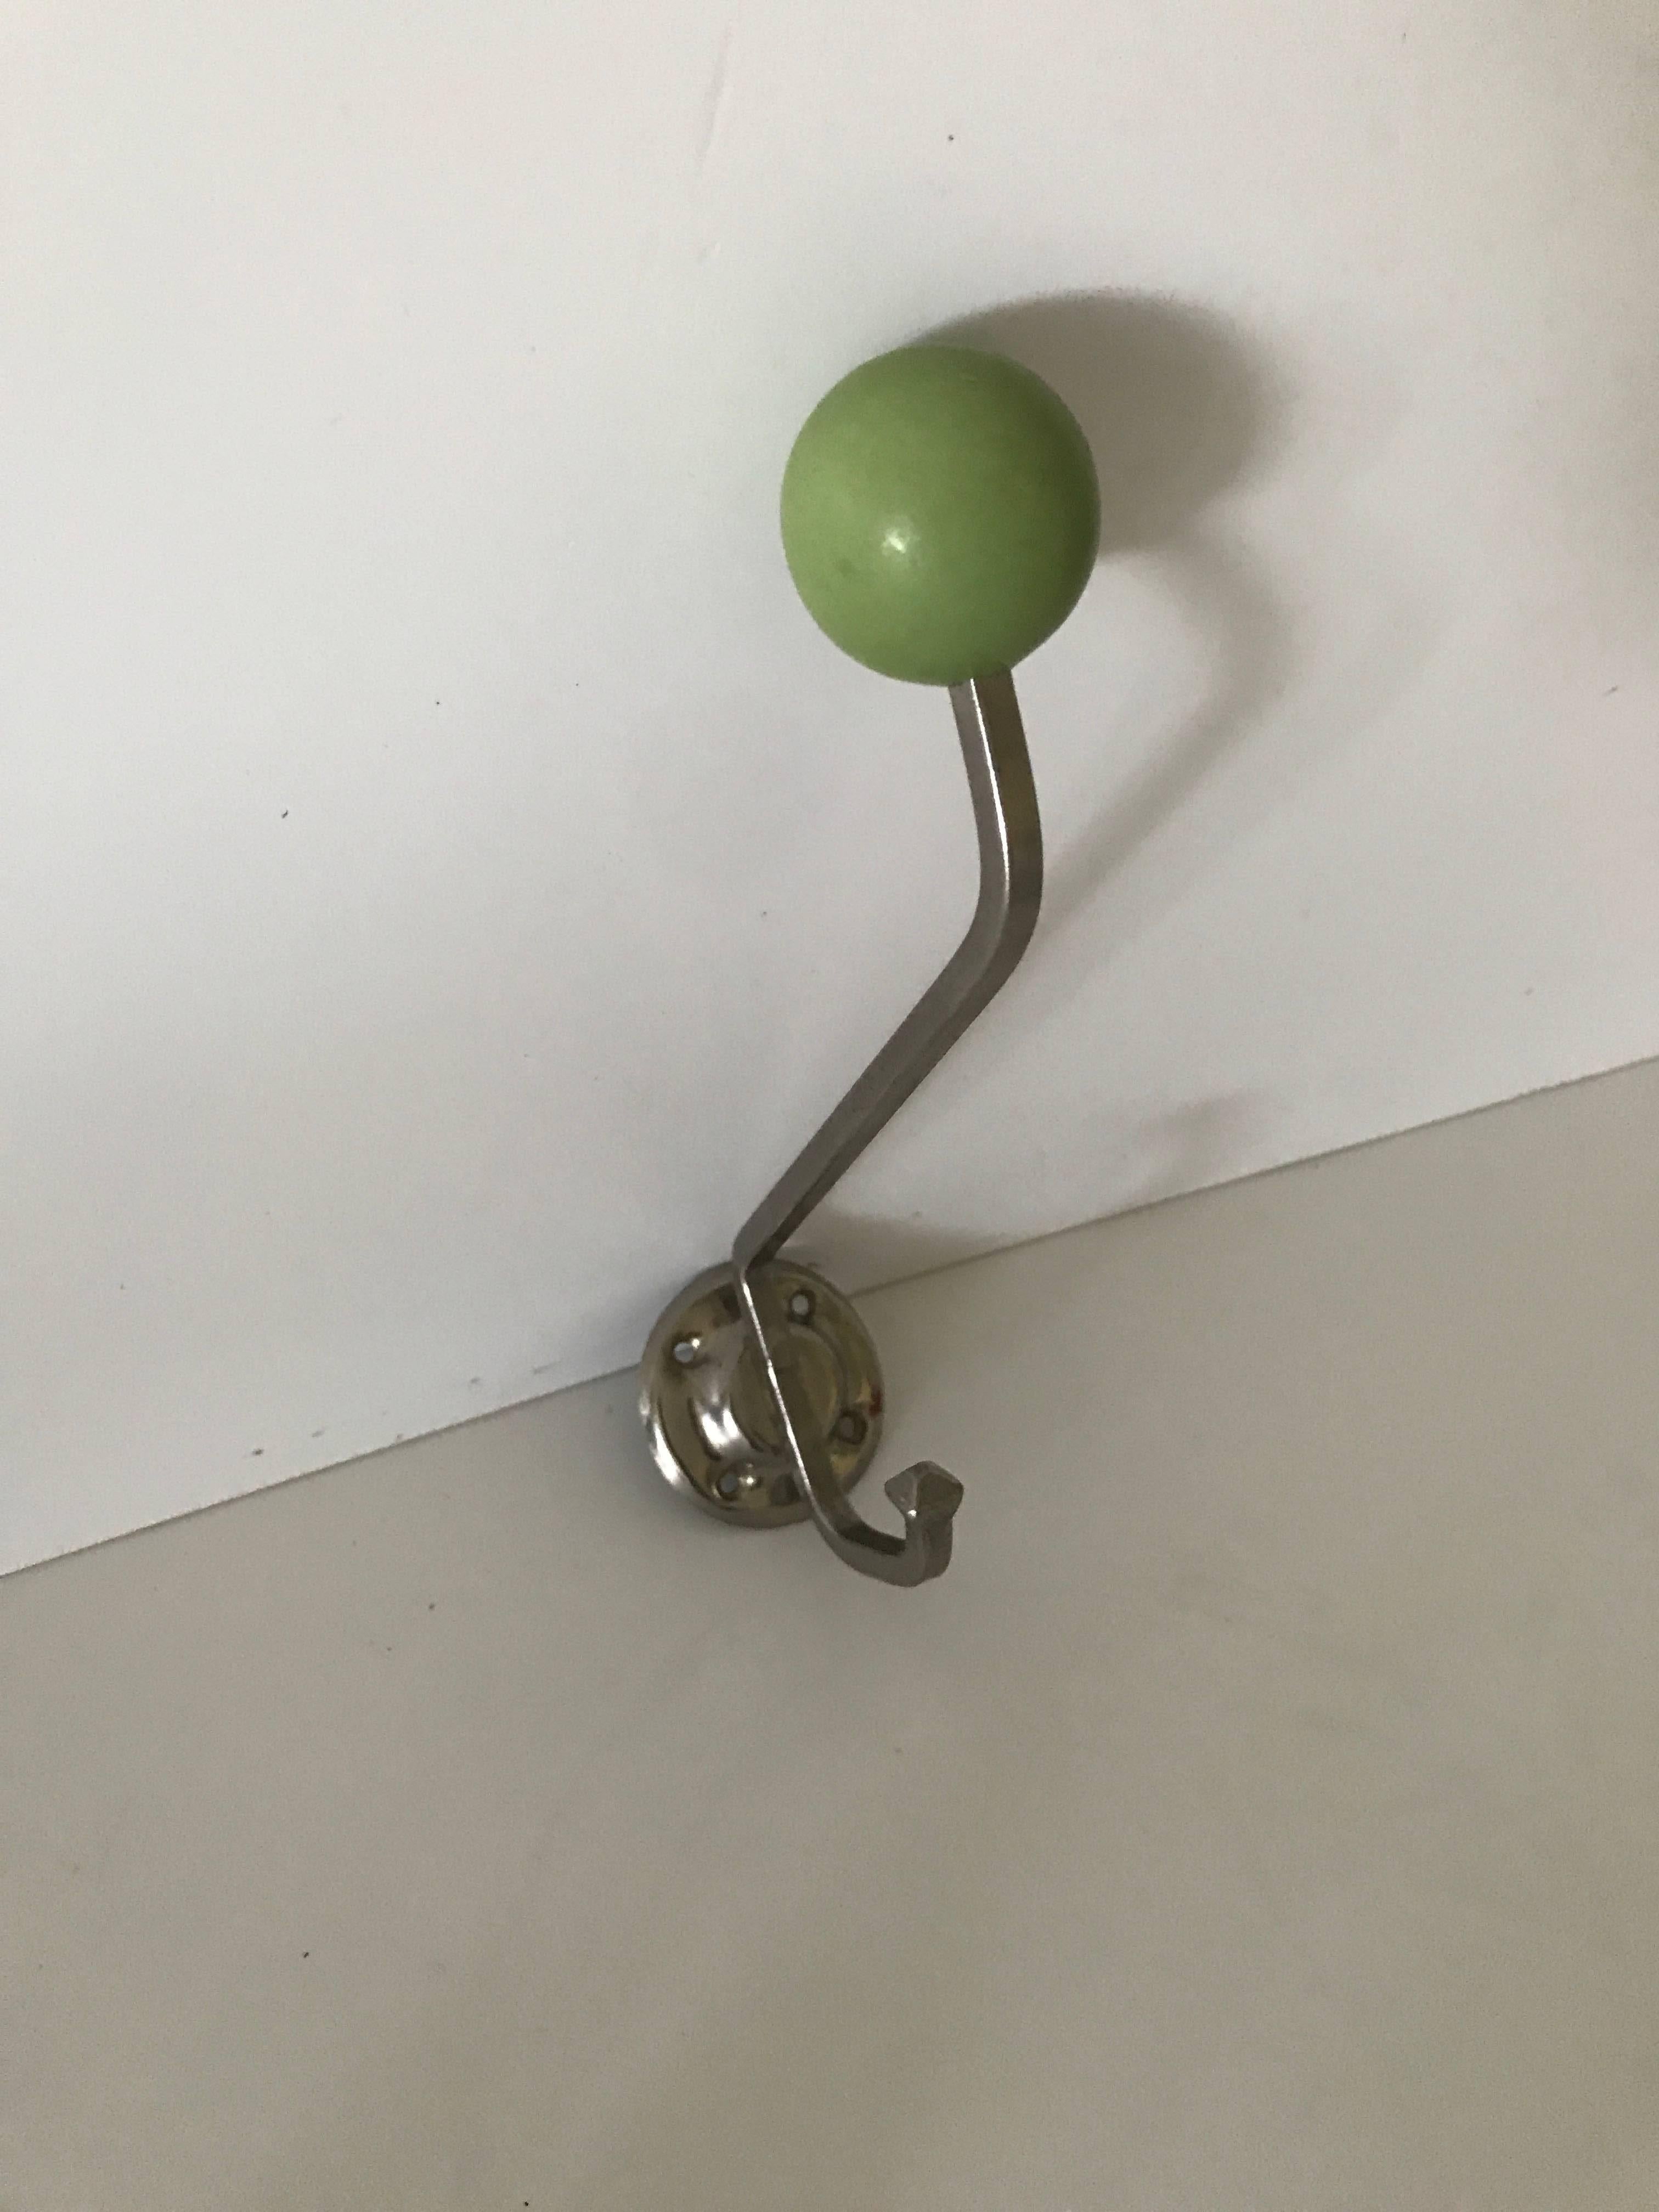 1930, Swedish Art Deco steel and Bakelite coat hangers.
Three beautiful coat hangers made of steel and a bakelite knob on top, they are in a nice original condition and without any cracks or damages. They measure 13cm out from the wall and 13cm in